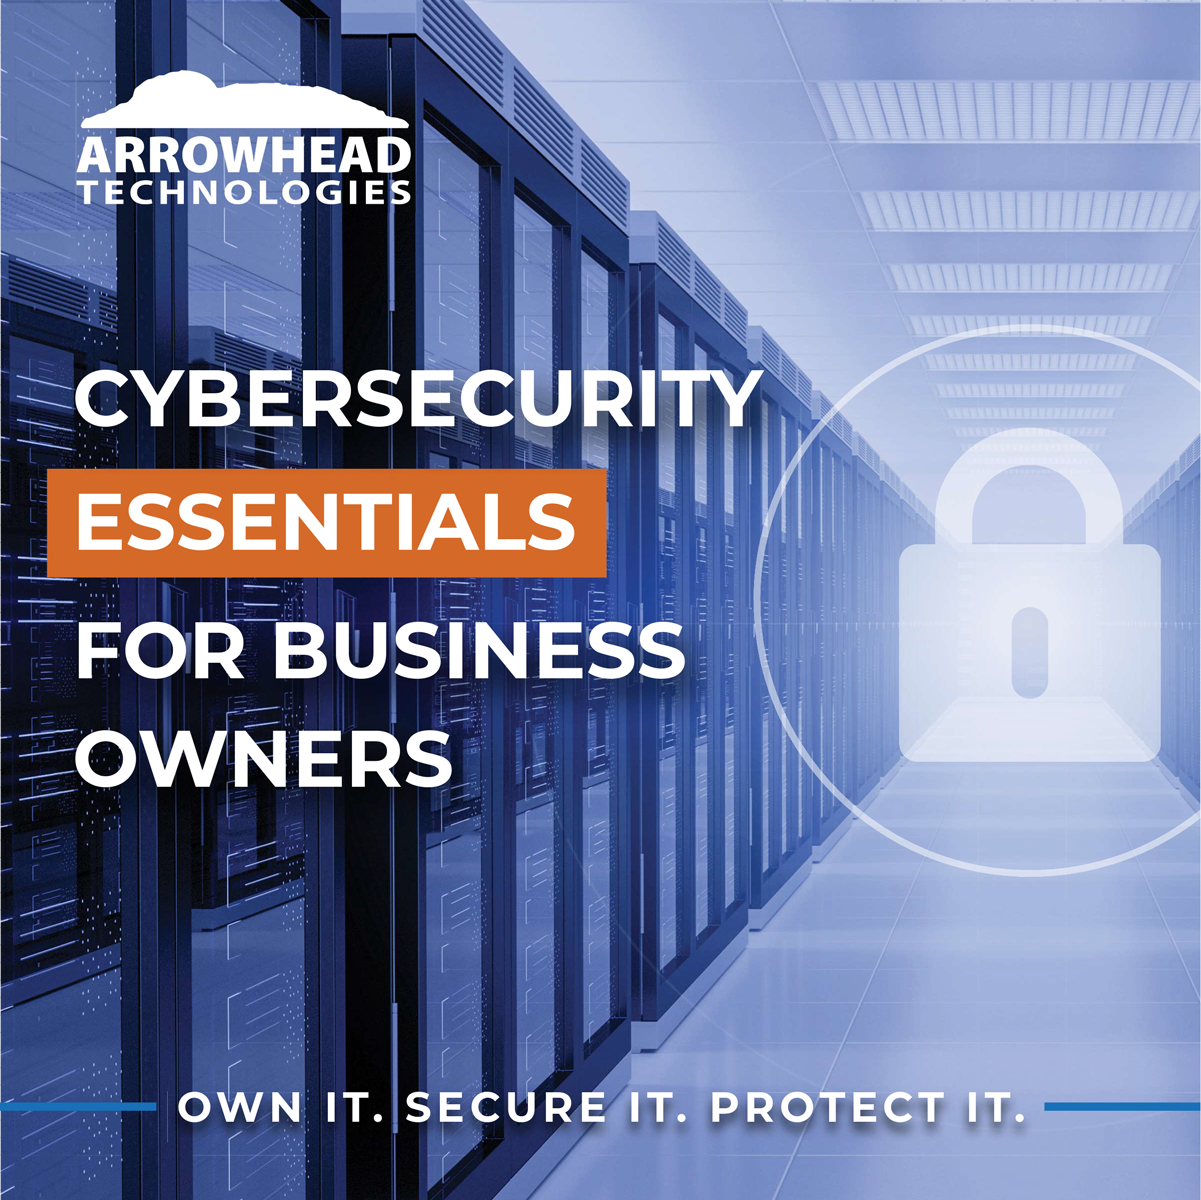 Cybersecurity booklet for business owners. Learn how you can protect your business from ransomware and cyber attacks,